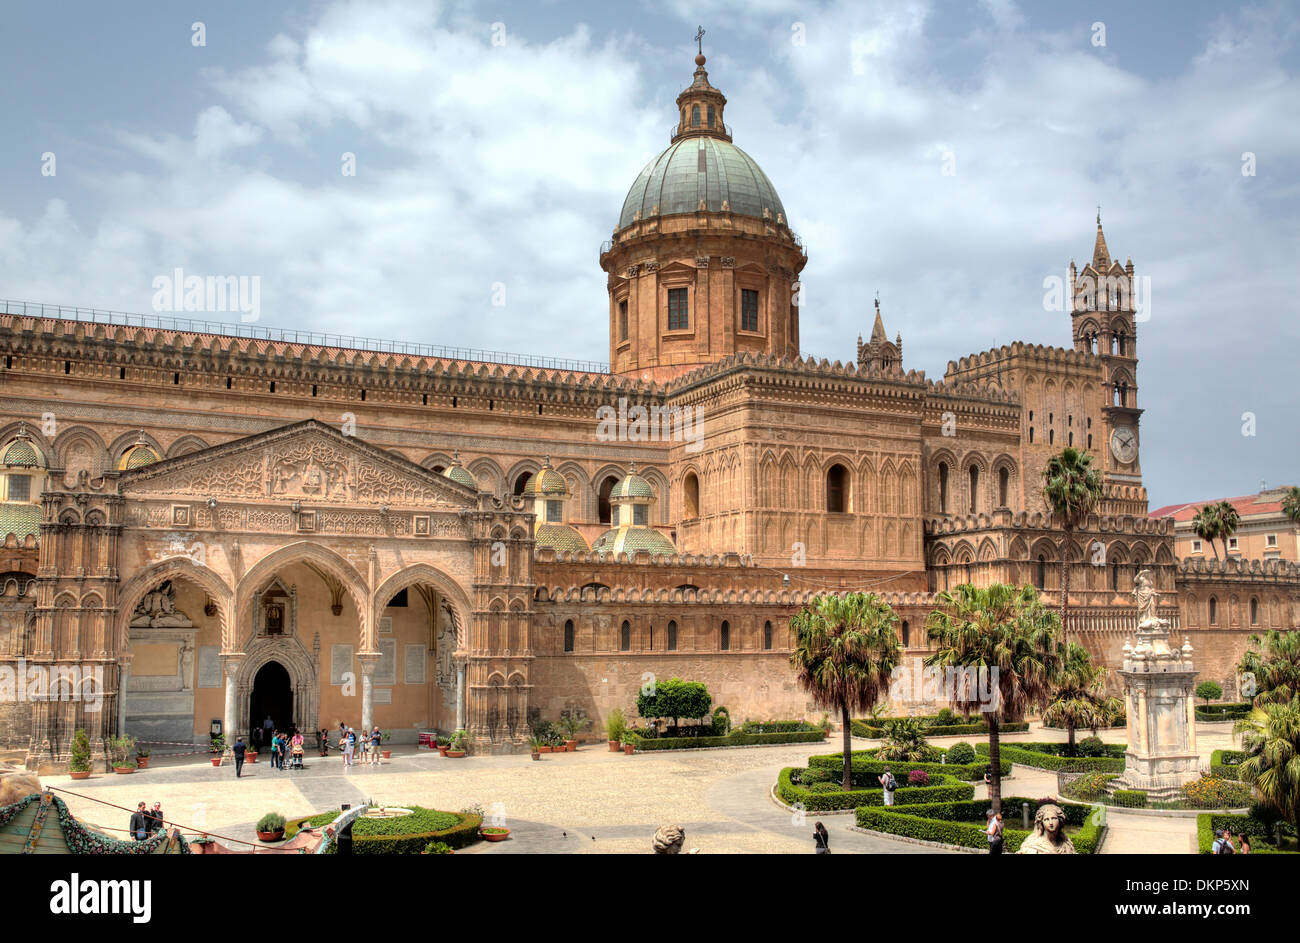 Palermo cathedral, Palermo, Sicily, Italy Stock Photo